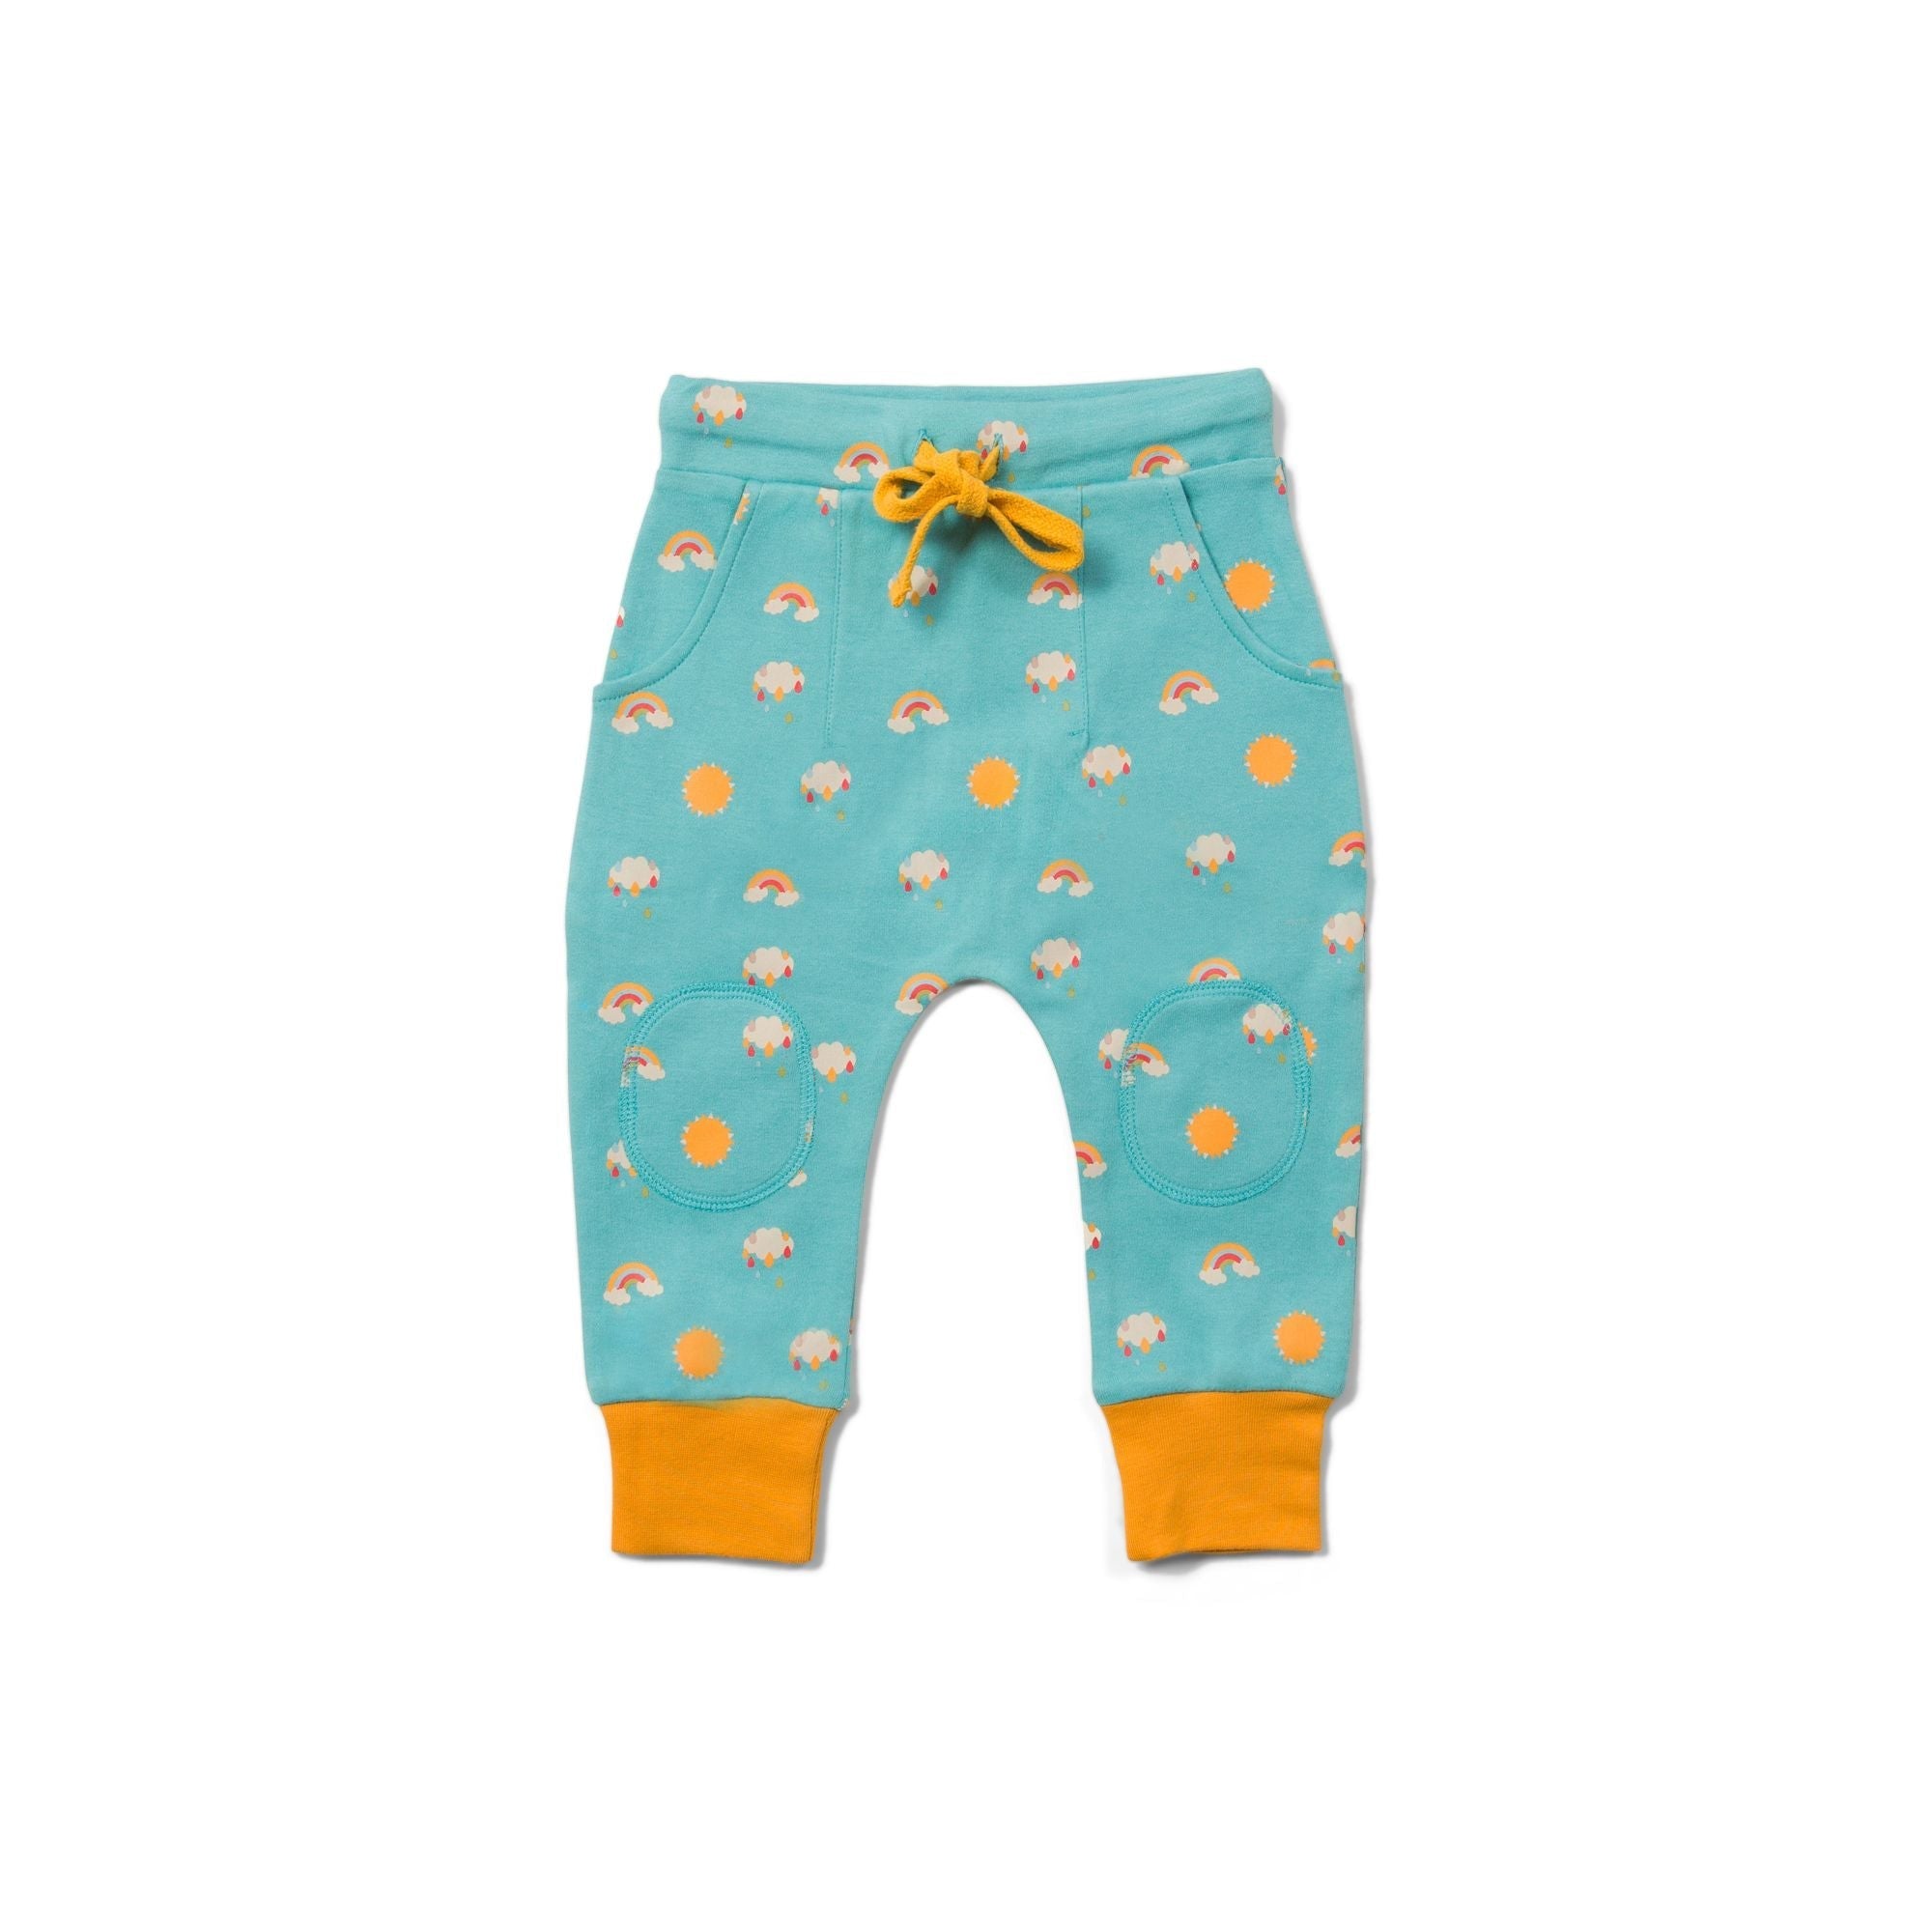 Sunny Days Organic Comfy Joggers - 1 Left Size 7-8 years-Little Green Radicals-Modern Rascals